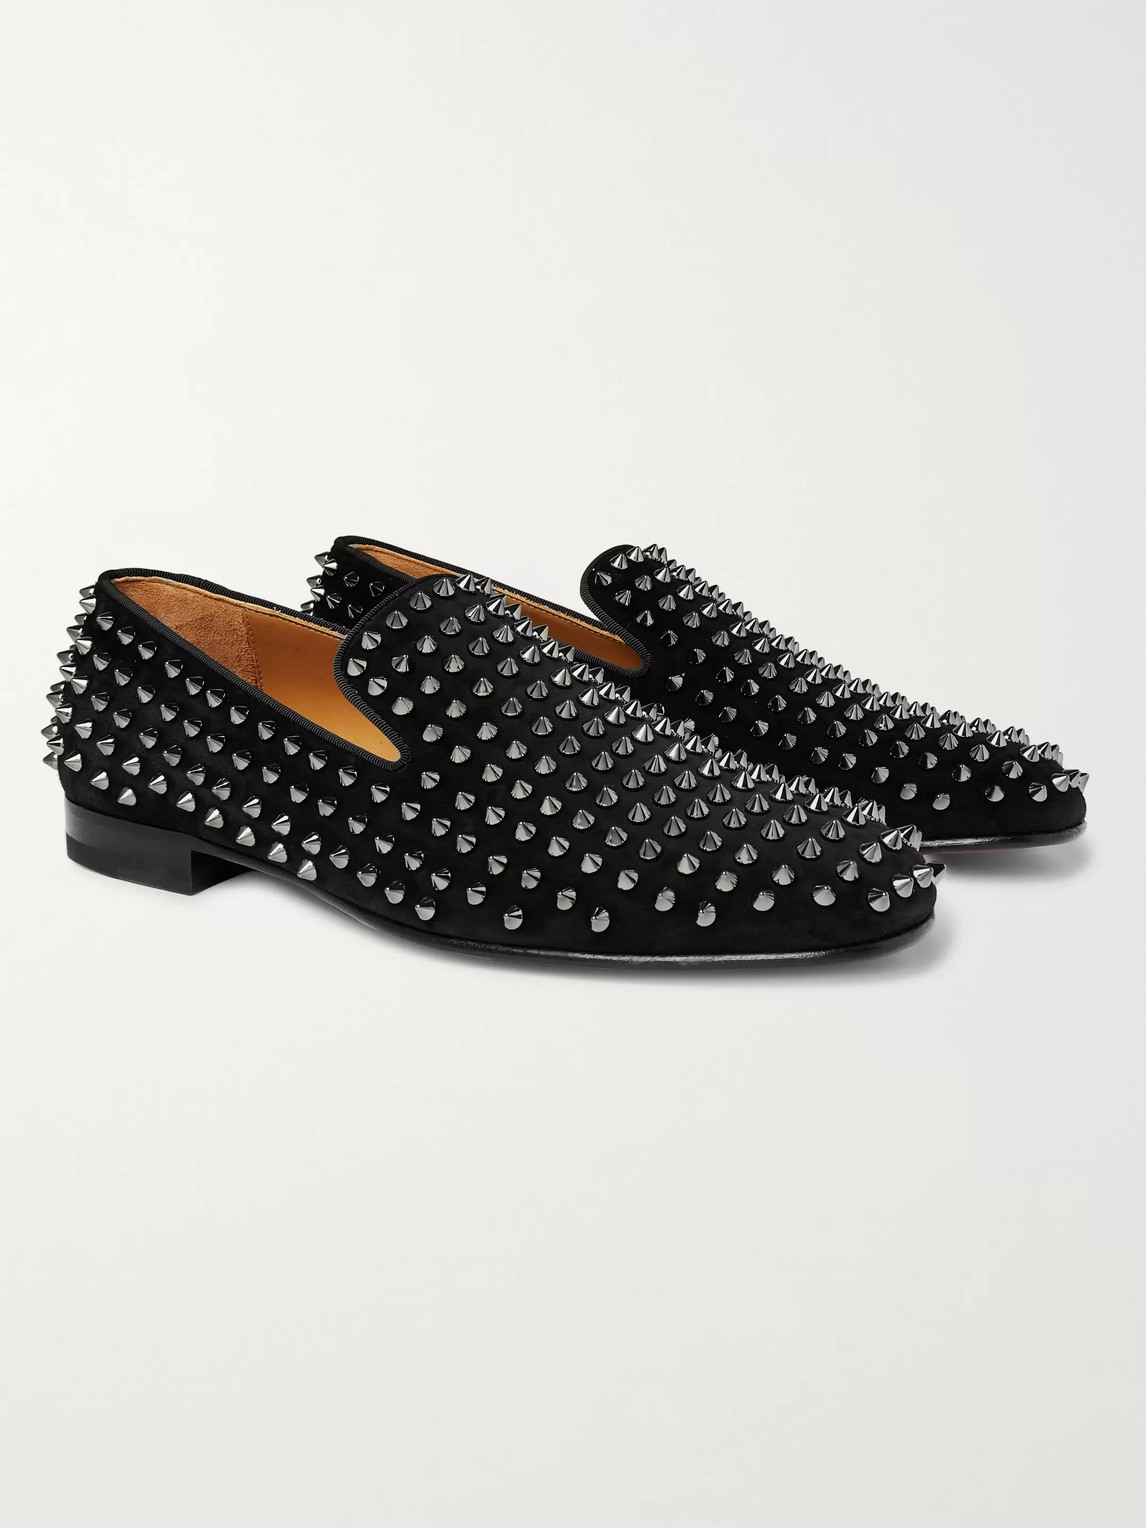 CHRISTIAN LOUBOUTIN ROLLERBOY SPIKES GROSGRAIN-TRIMMED SUEDE LOAFERS